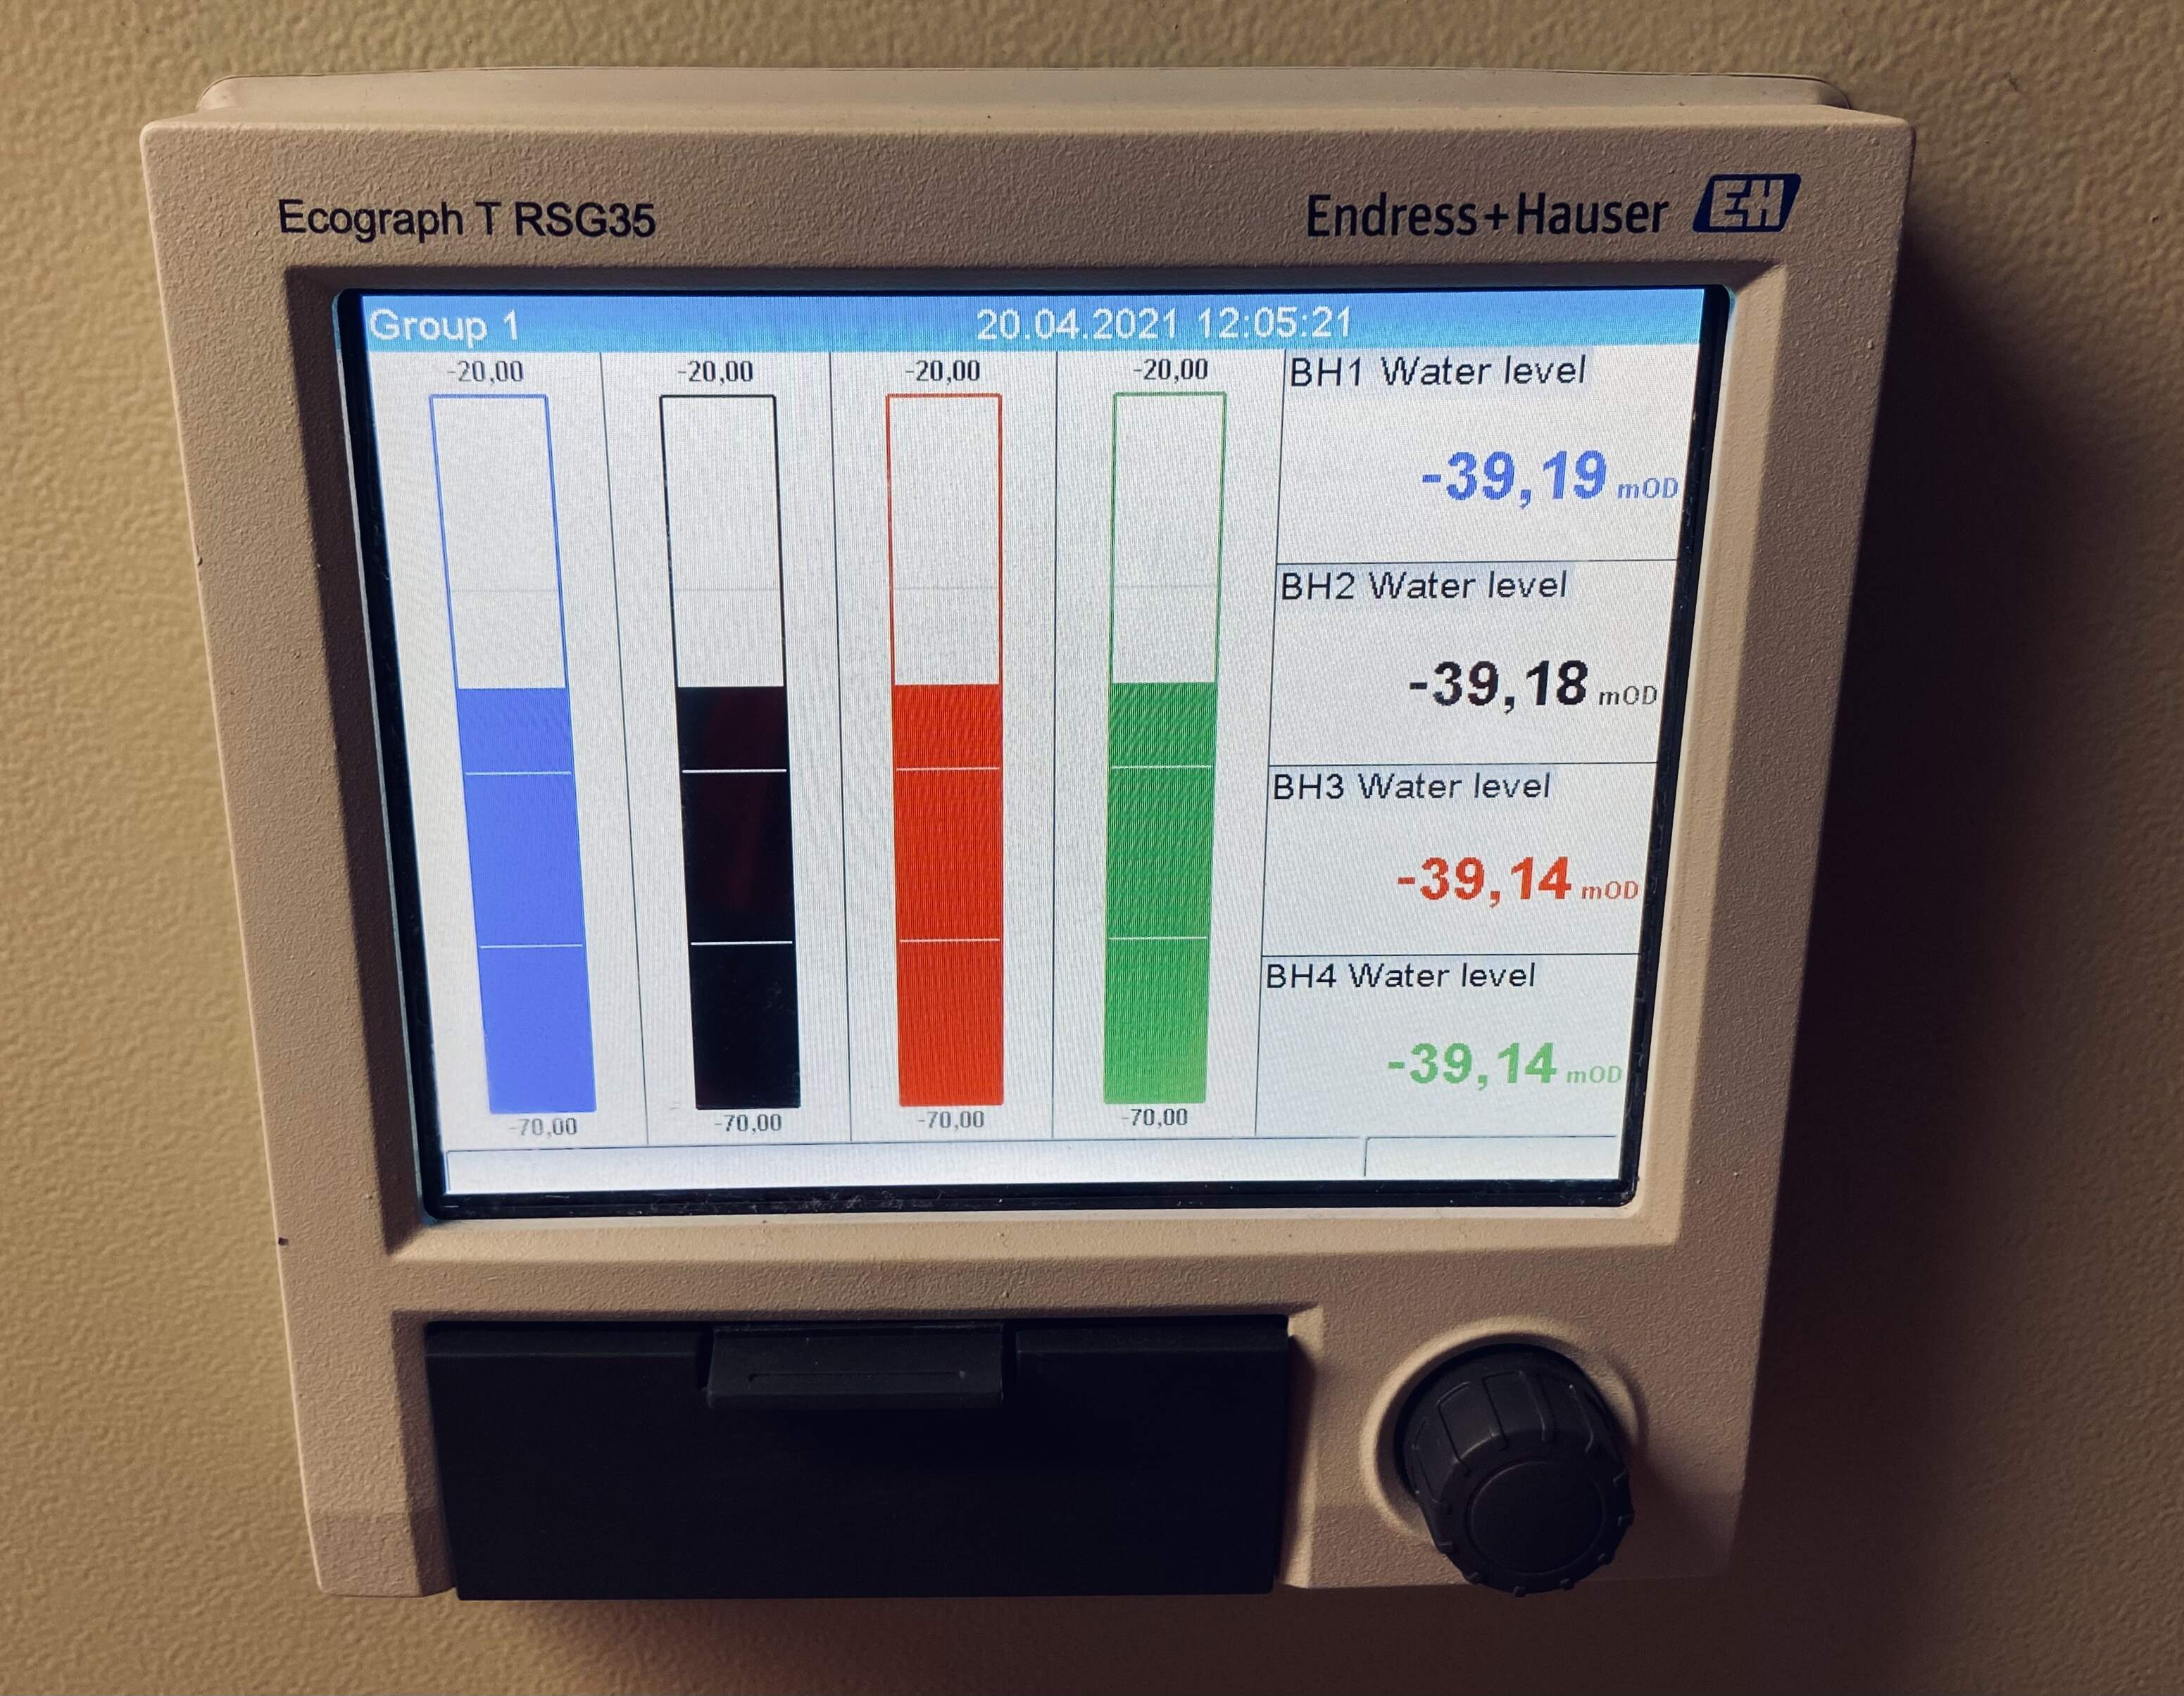 VDU panel with borehole water levels